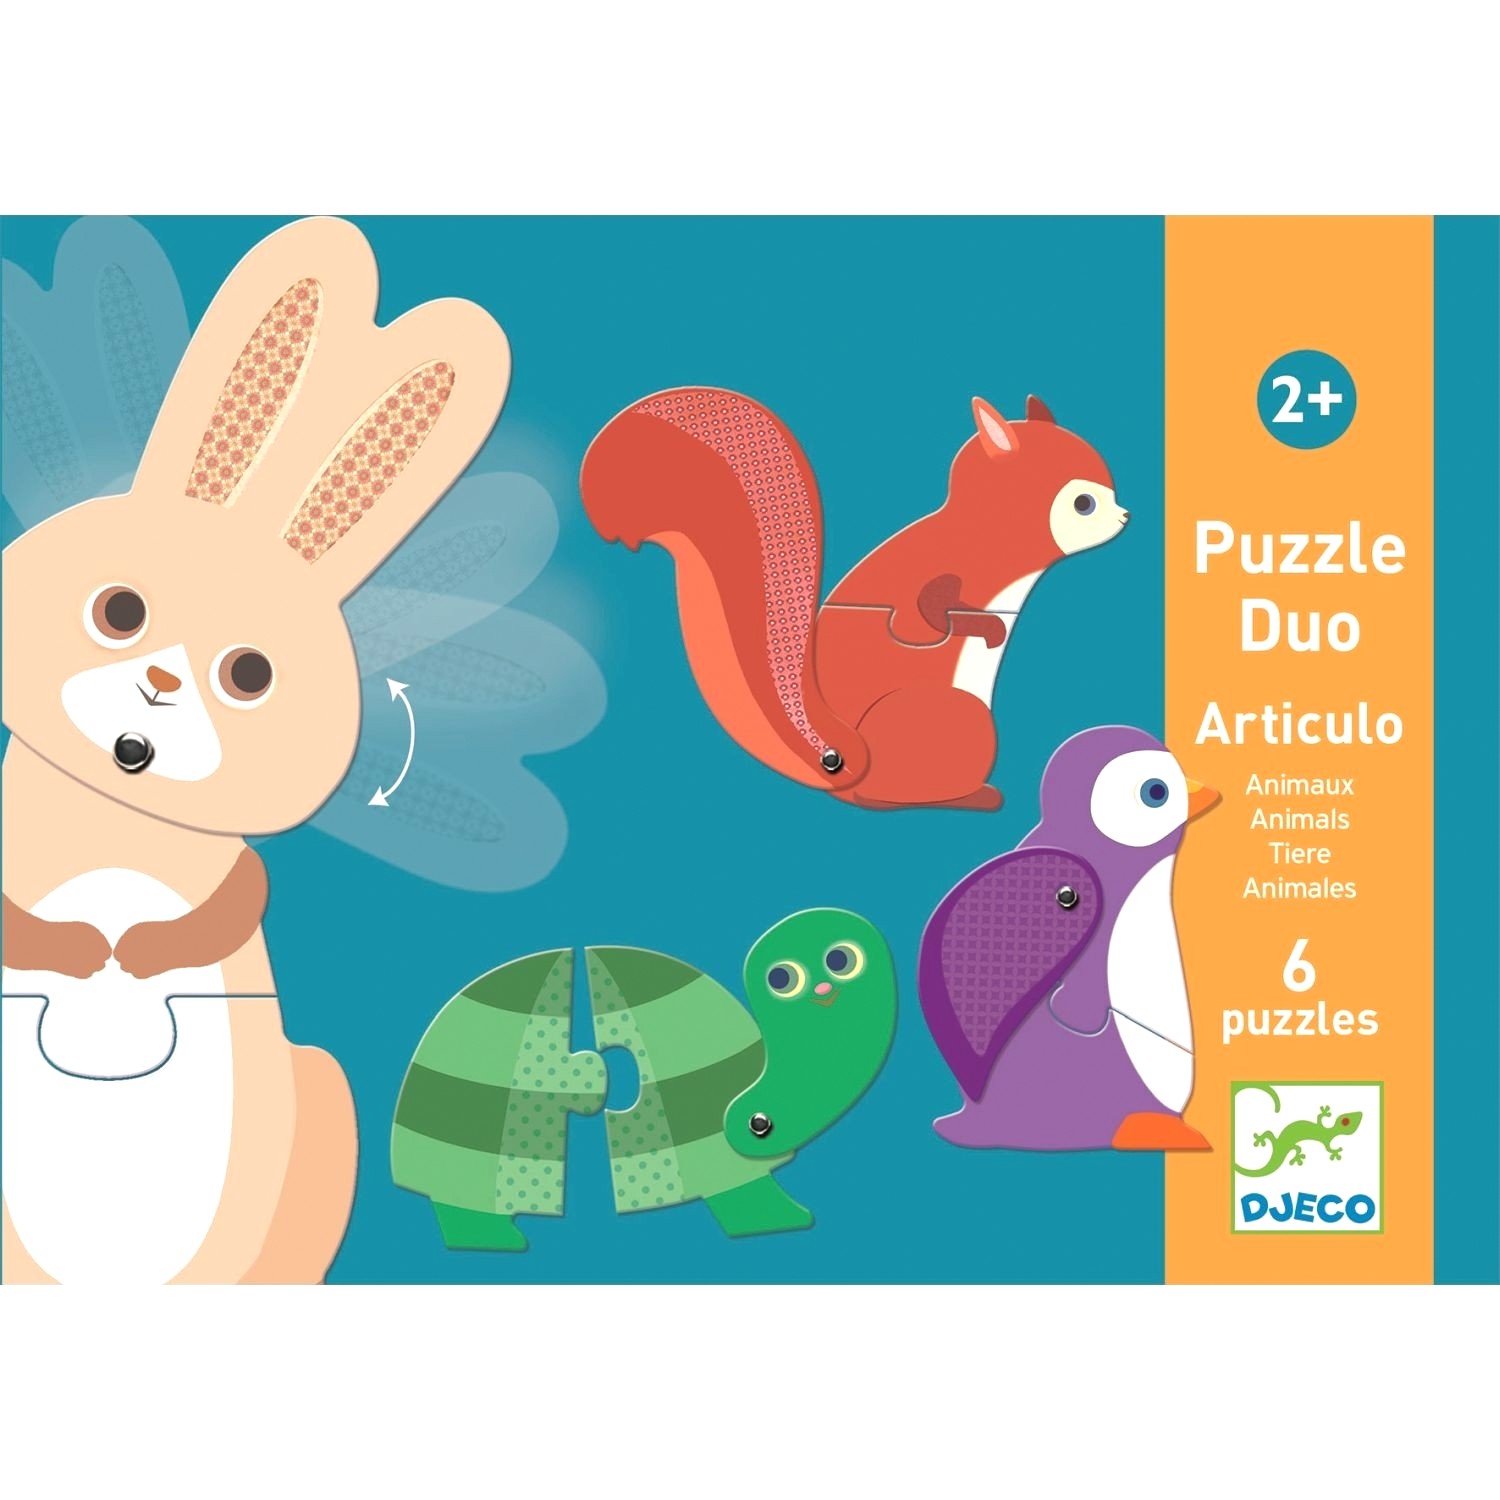 Puzzle Duo Articulo, Animaux. Animale